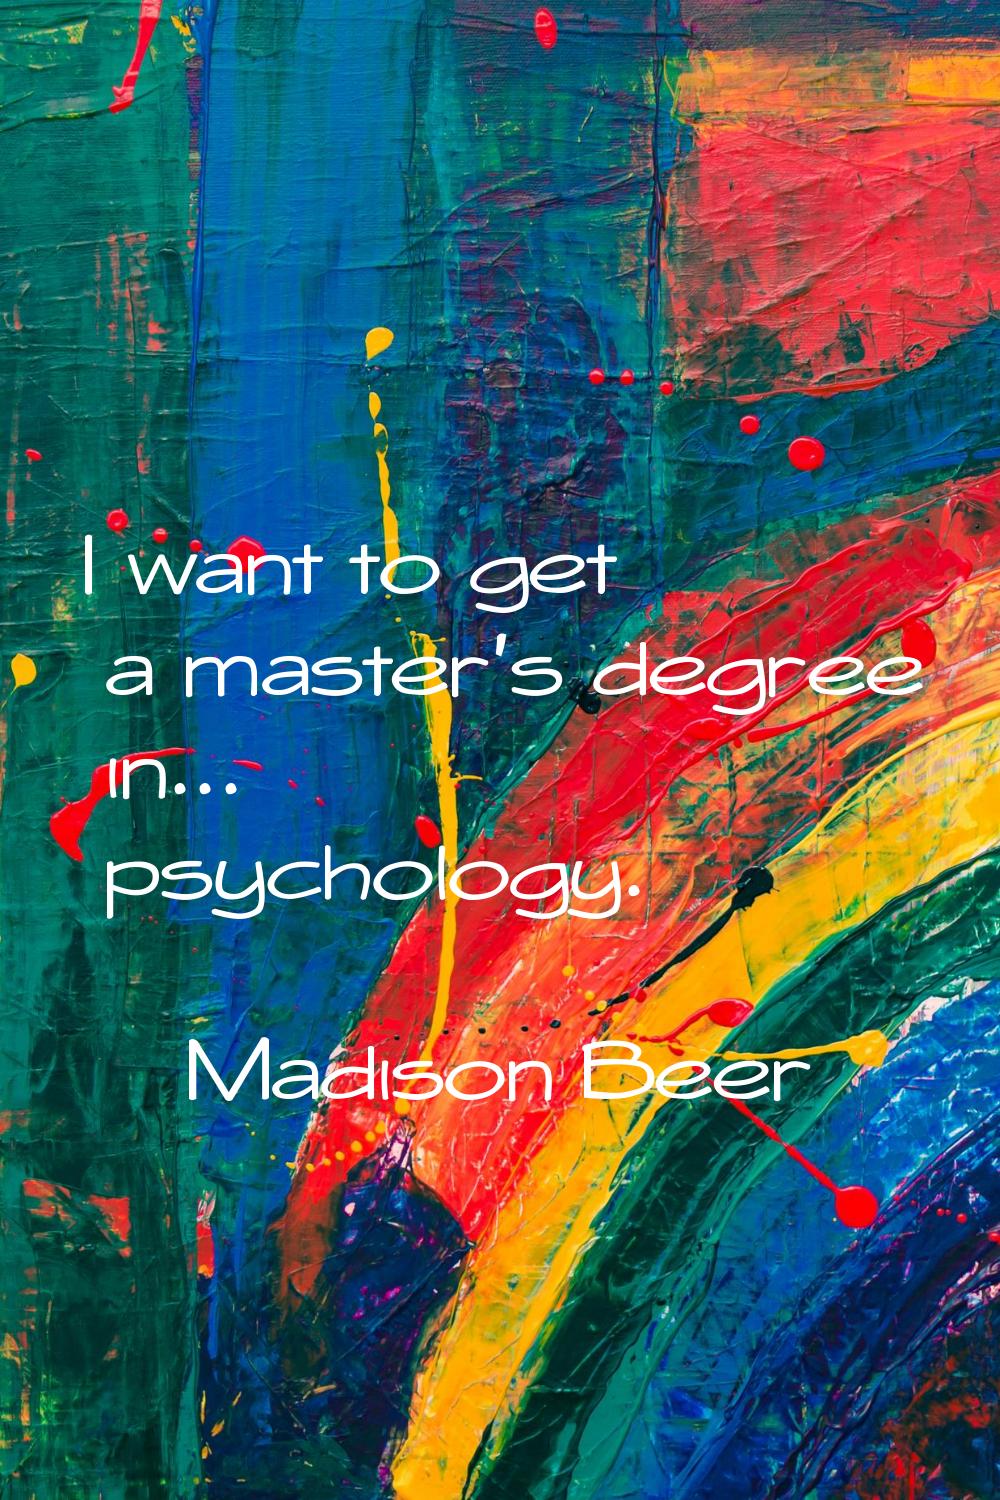 I want to get a master's degree in... psychology.